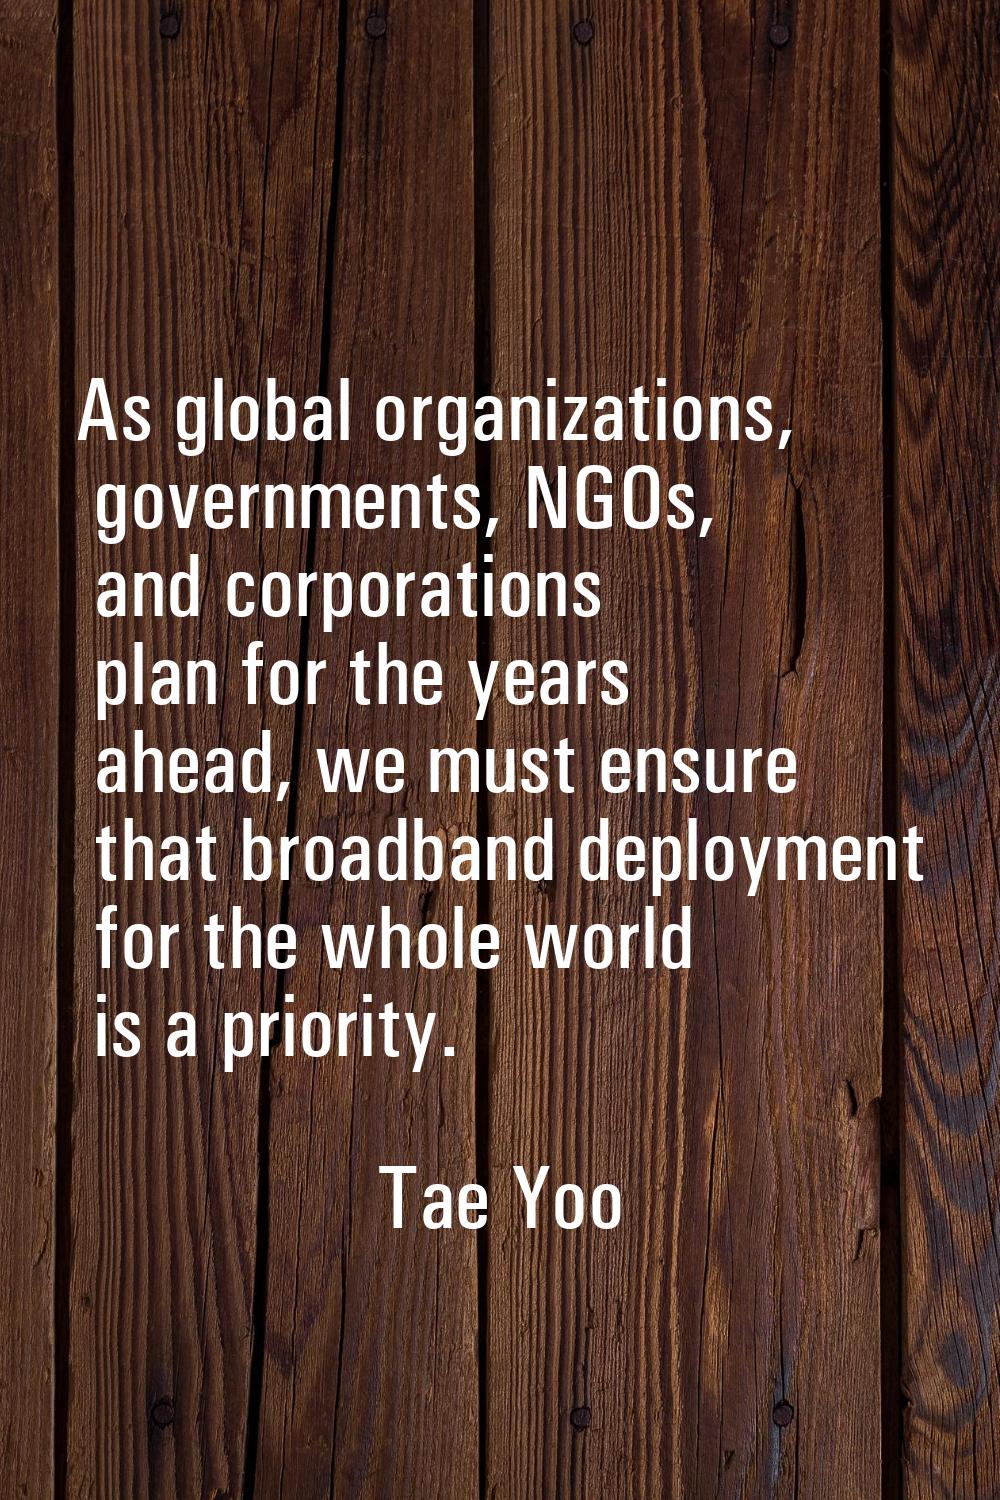 As global organizations, governments, NGOs, and corporations plan for the years ahead, we must ensu